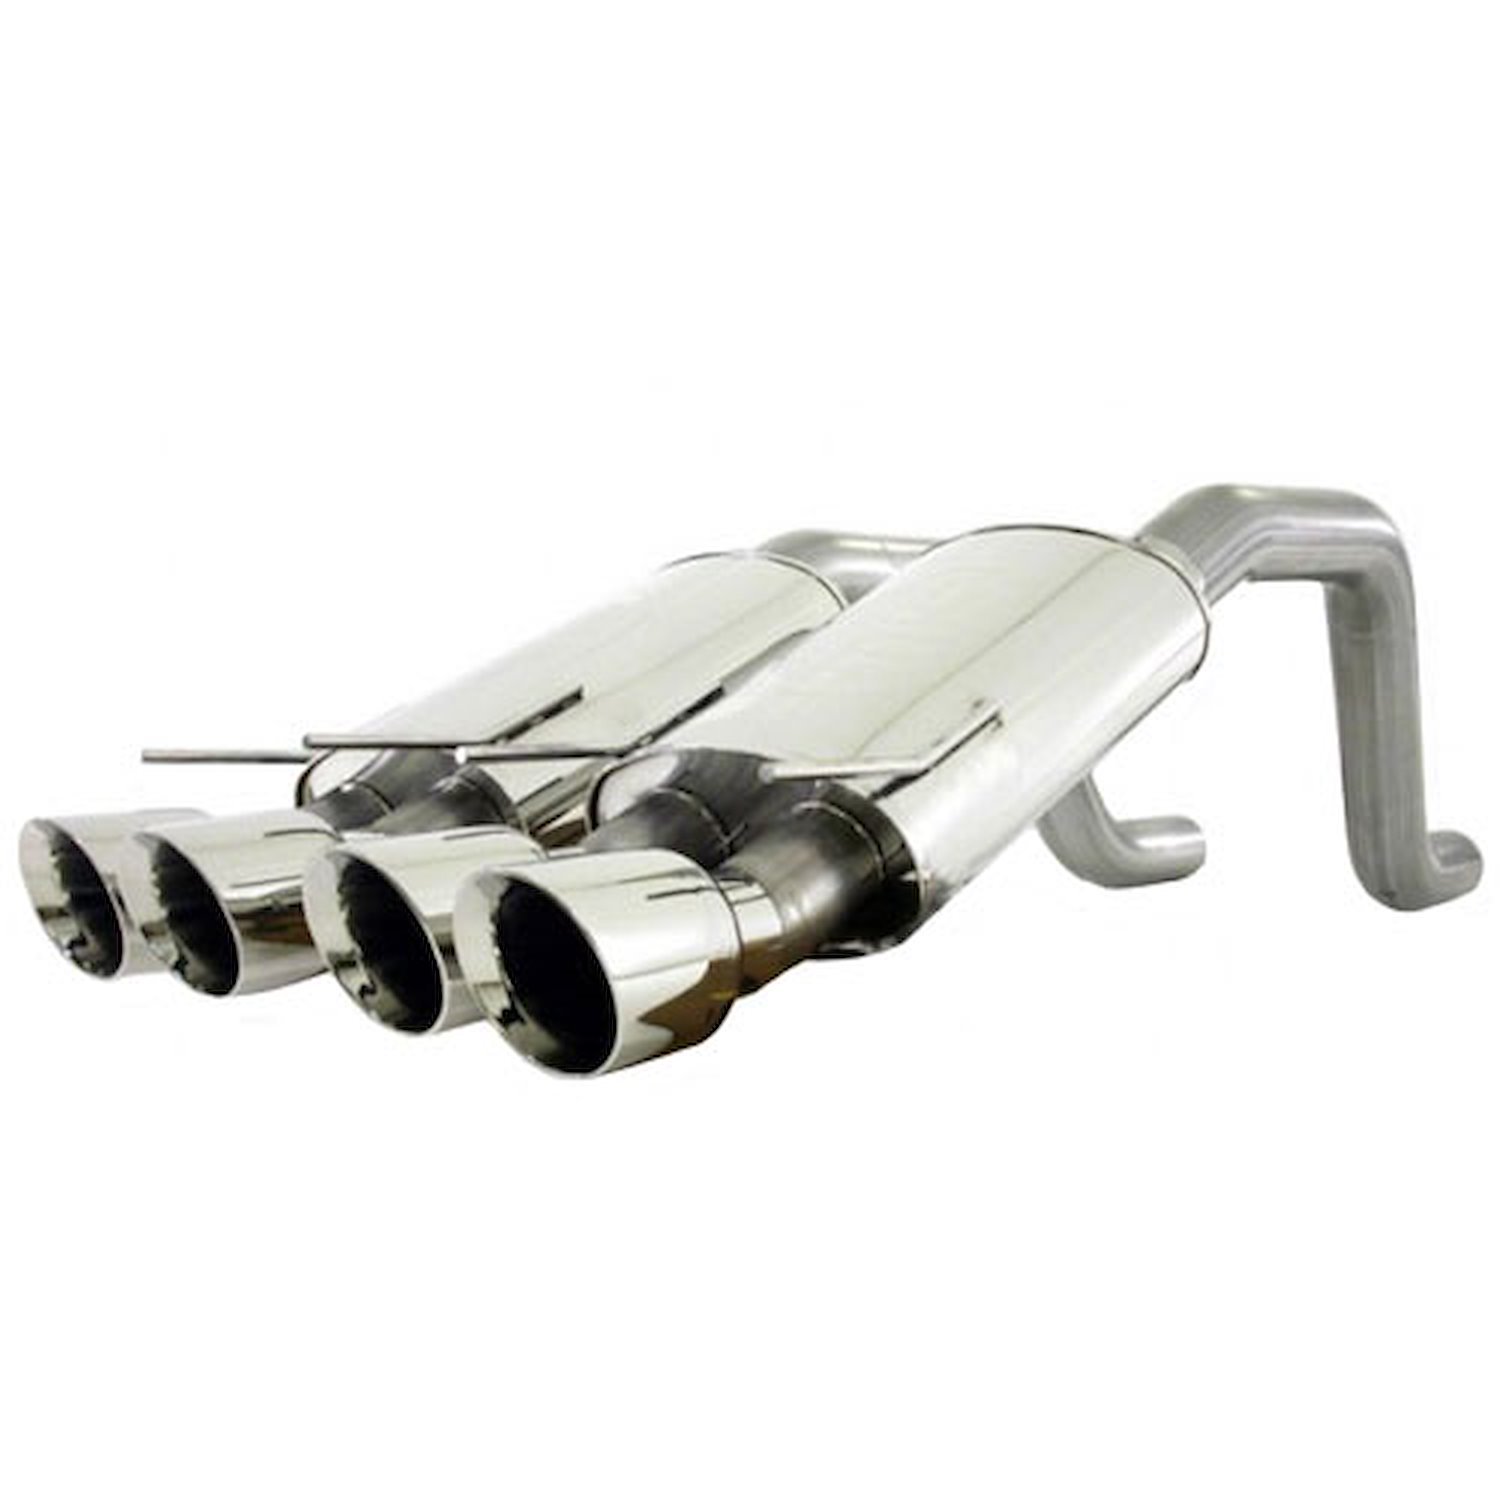 C6ZO6 Corvette 3 axle back exhaust. Lightweight 18 gauge 304 SS with mirror polished chambered turbo